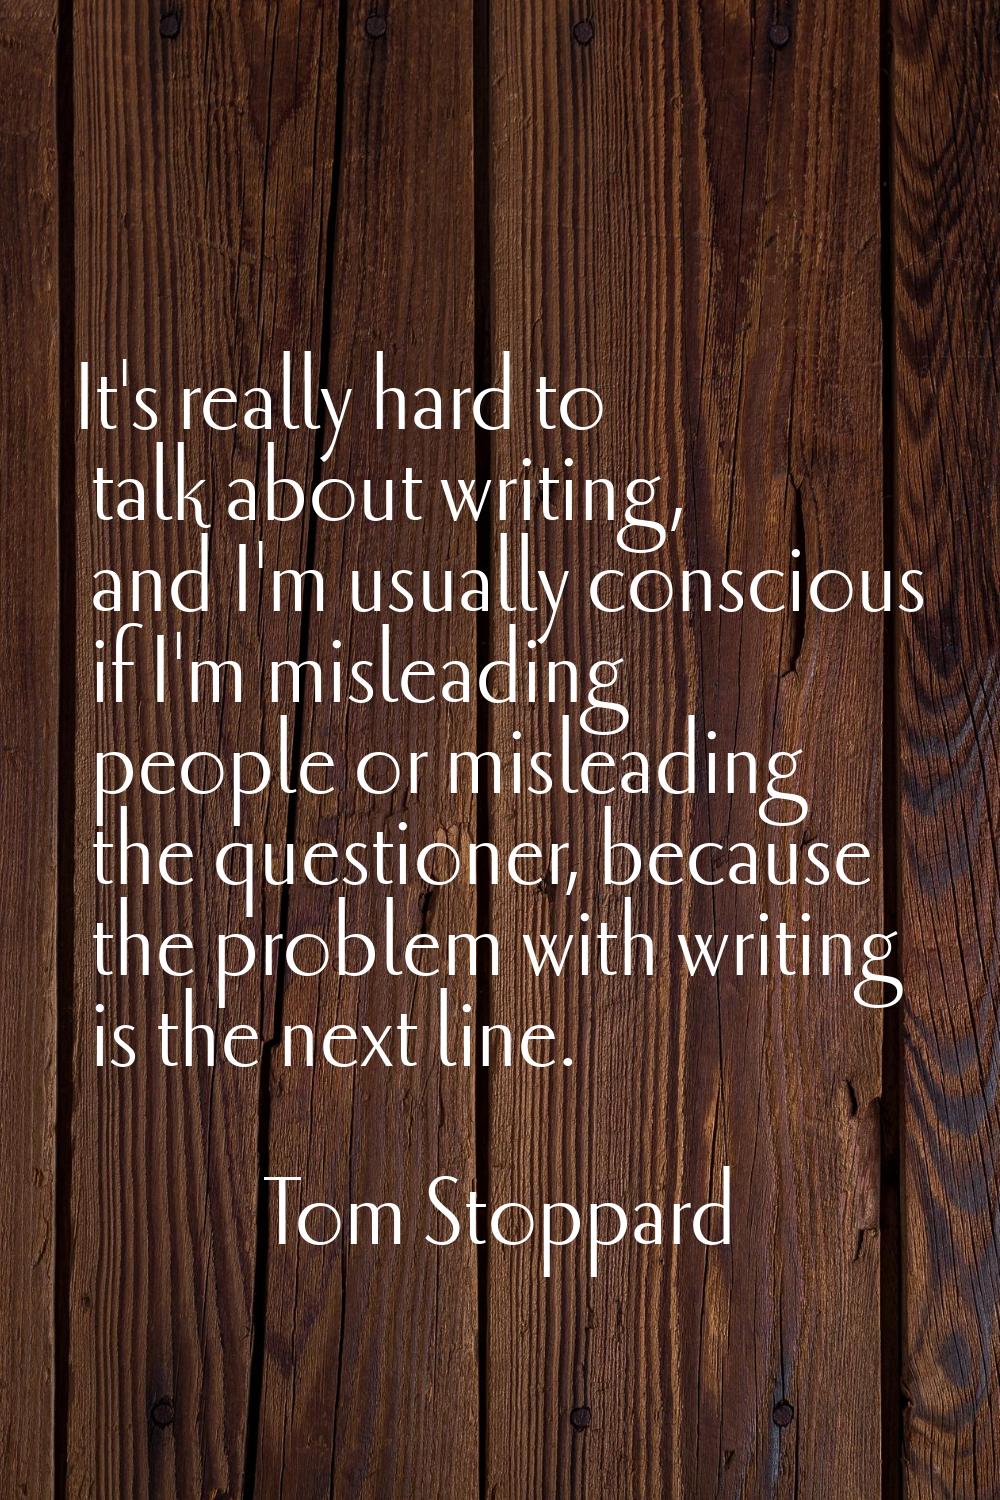 It's really hard to talk about writing, and I'm usually conscious if I'm misleading people or misle